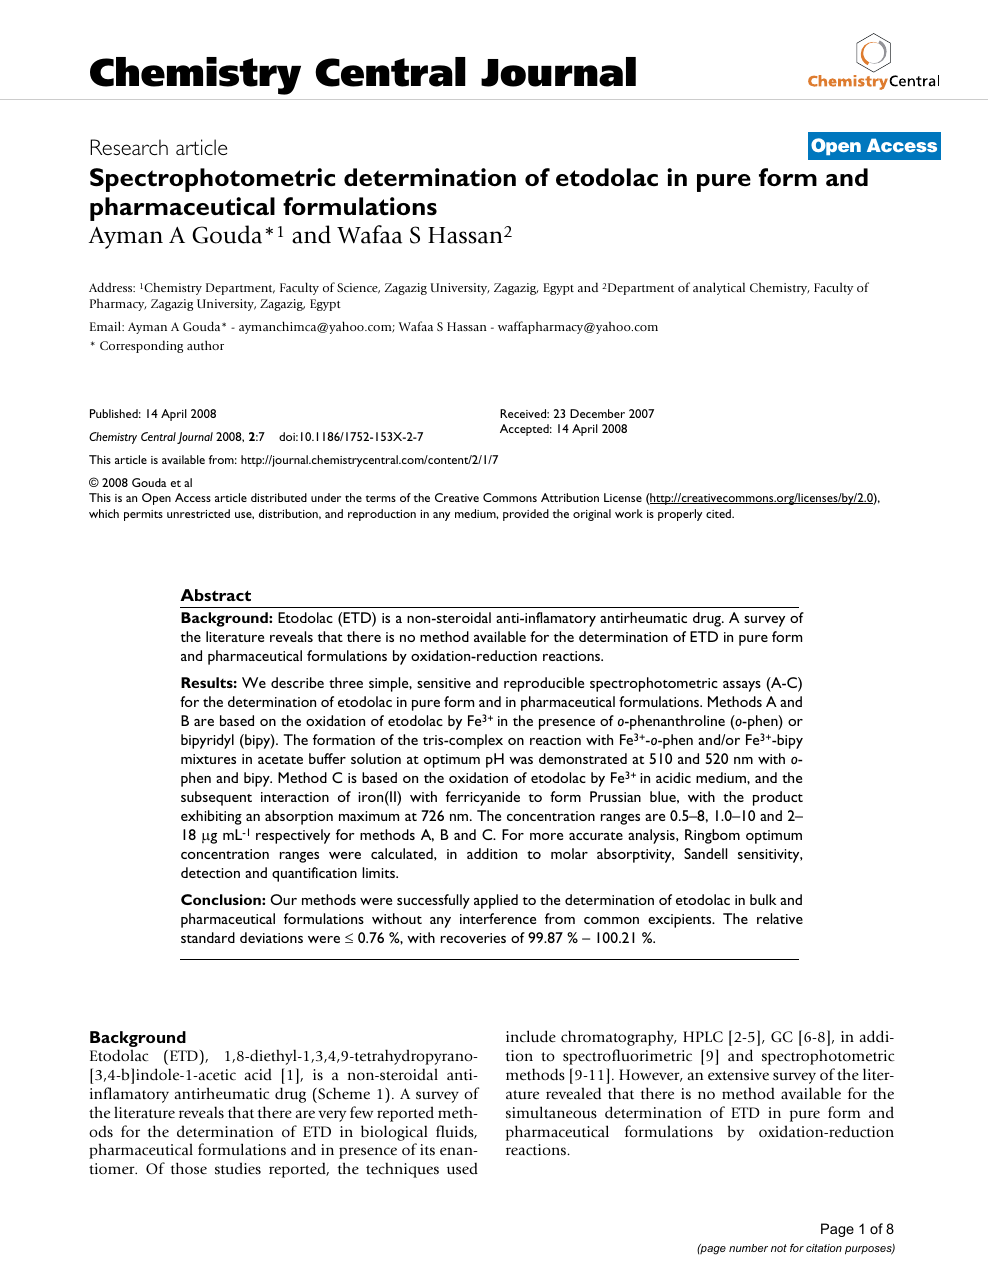 Spectrophotometric Determination Of Etodolac In Pure Form And Pharmaceutical Formulations Topic Of Research Paper In Chemical Sciences Download Scholarly Article Pdf And Read For Free On Cyberleninka Open Science Hub